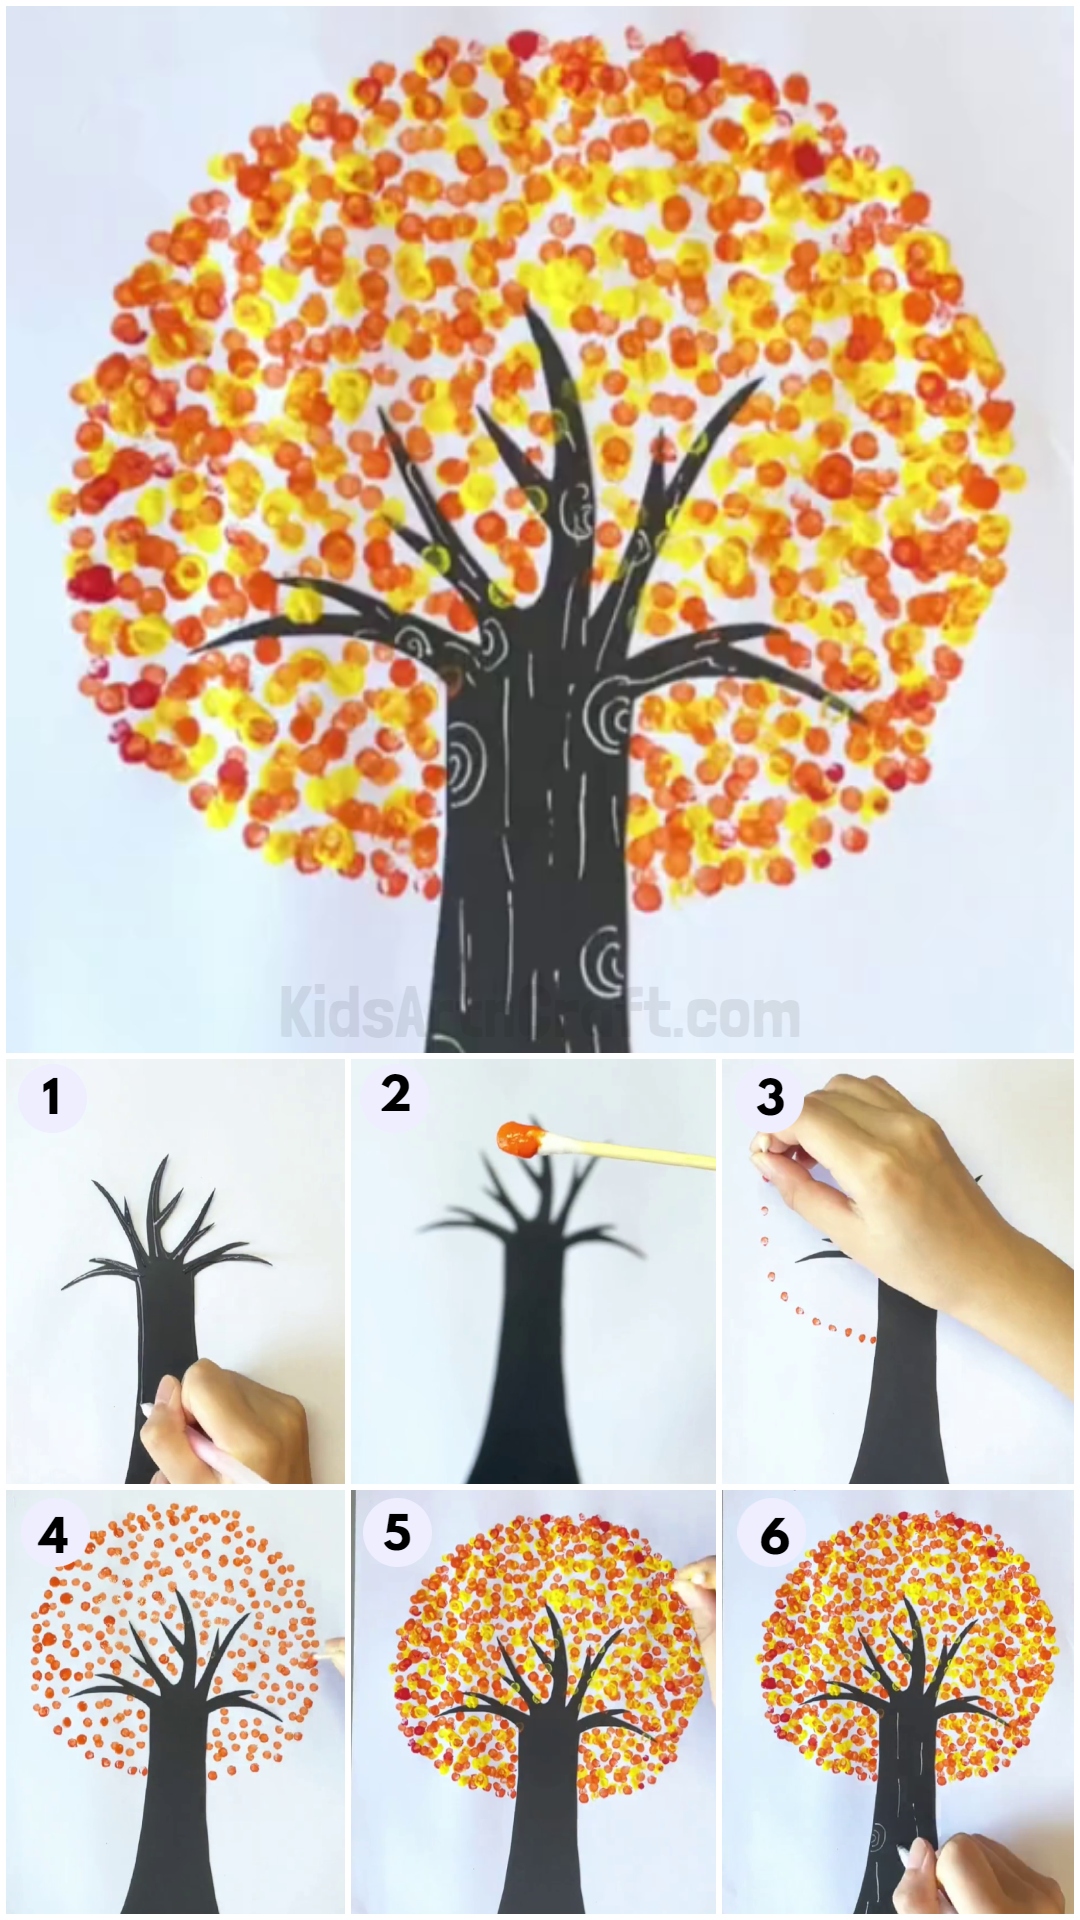 Easy Tree Painting Using Ear buds for kids-Utilizing earbuds, kids can easily create a tree painting